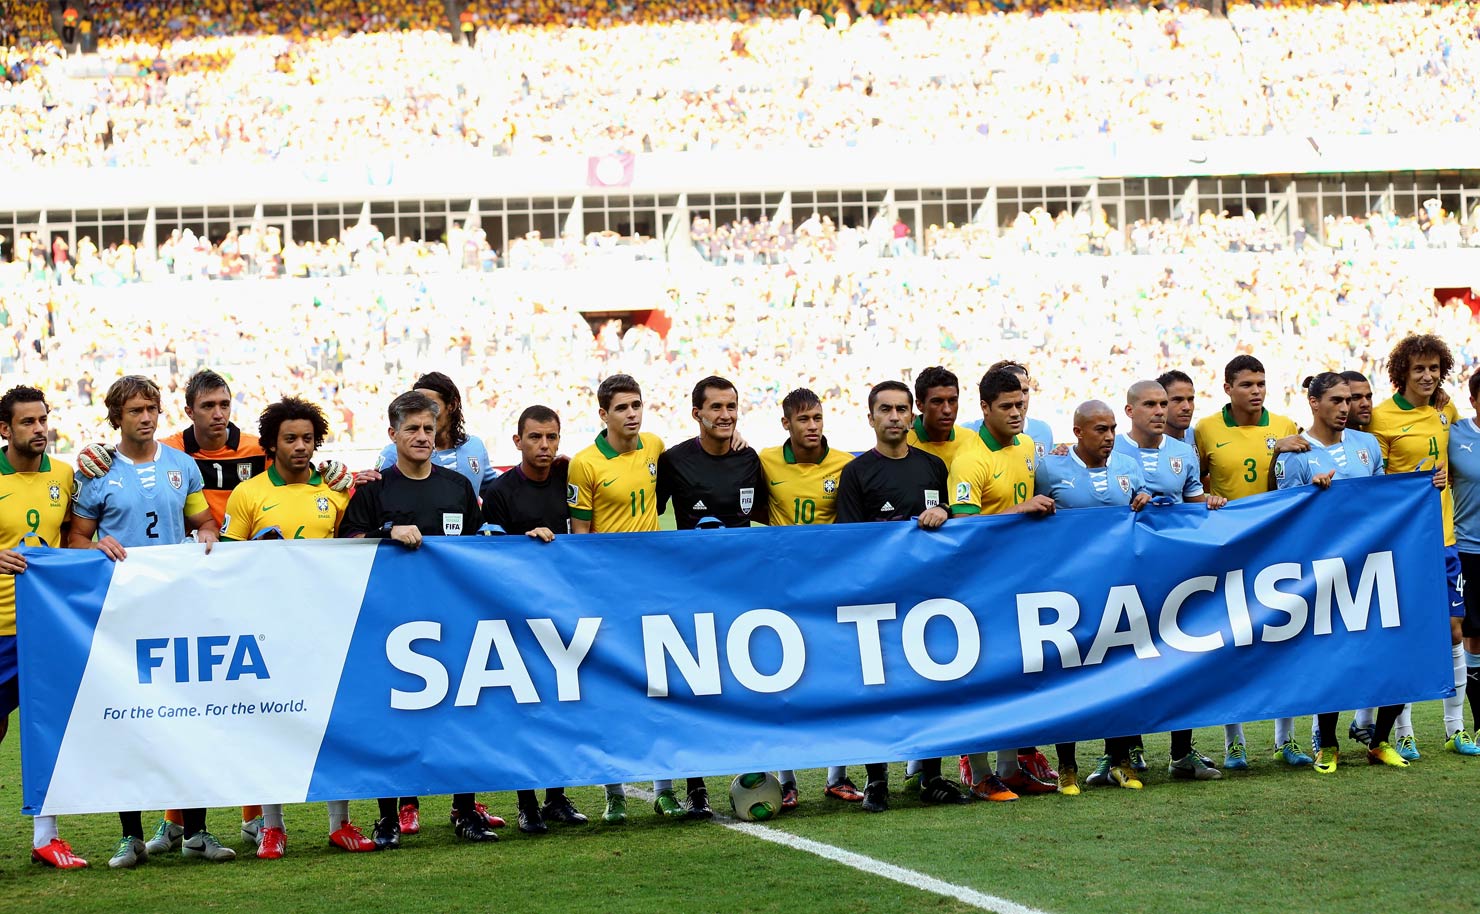 Jaimie Fuller: While FIFA Says Racism is Fixed, Athletes in the US Kneel